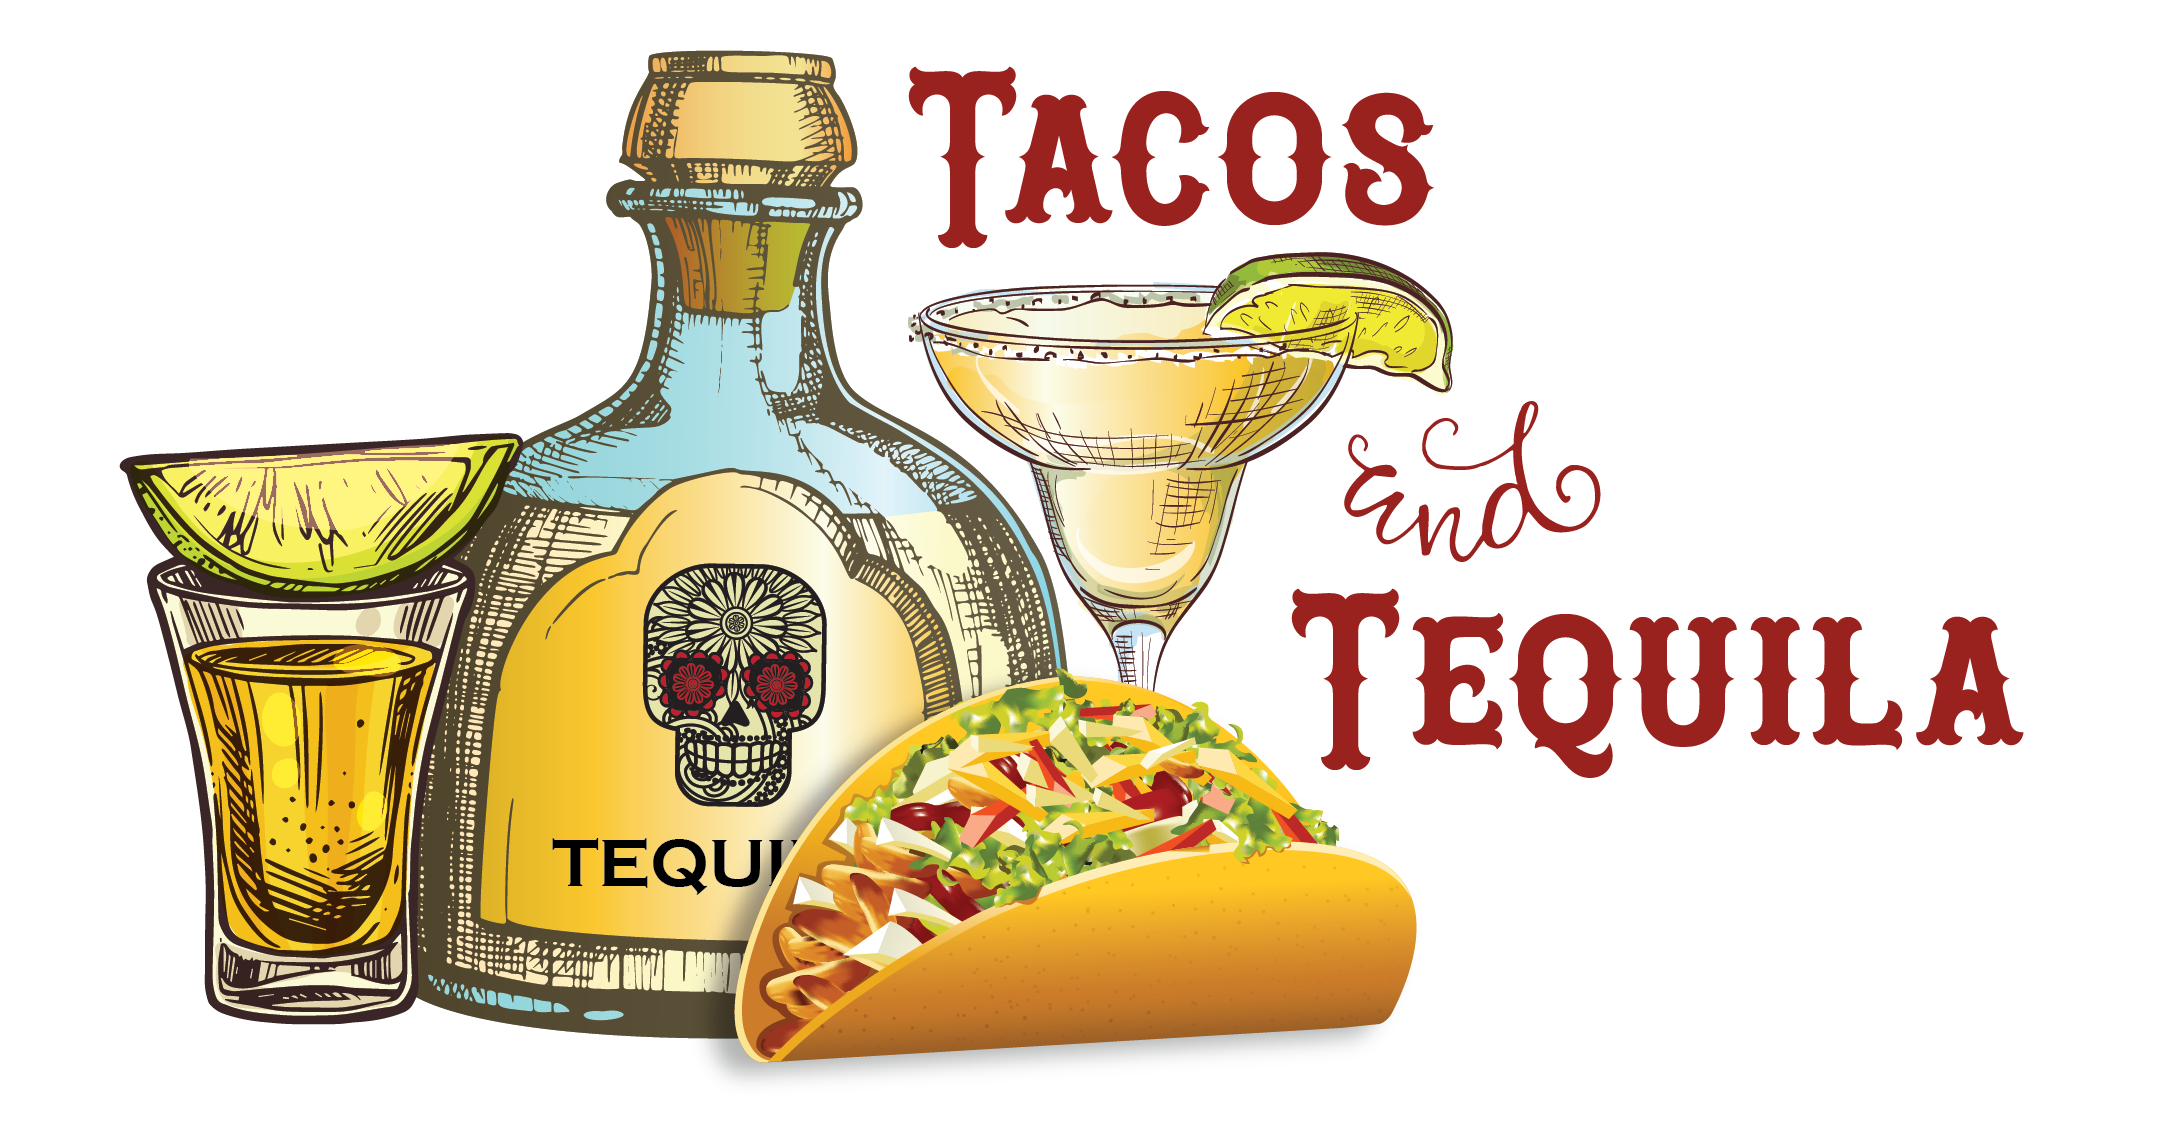 Tacos and Tequila, presented by Rockstock